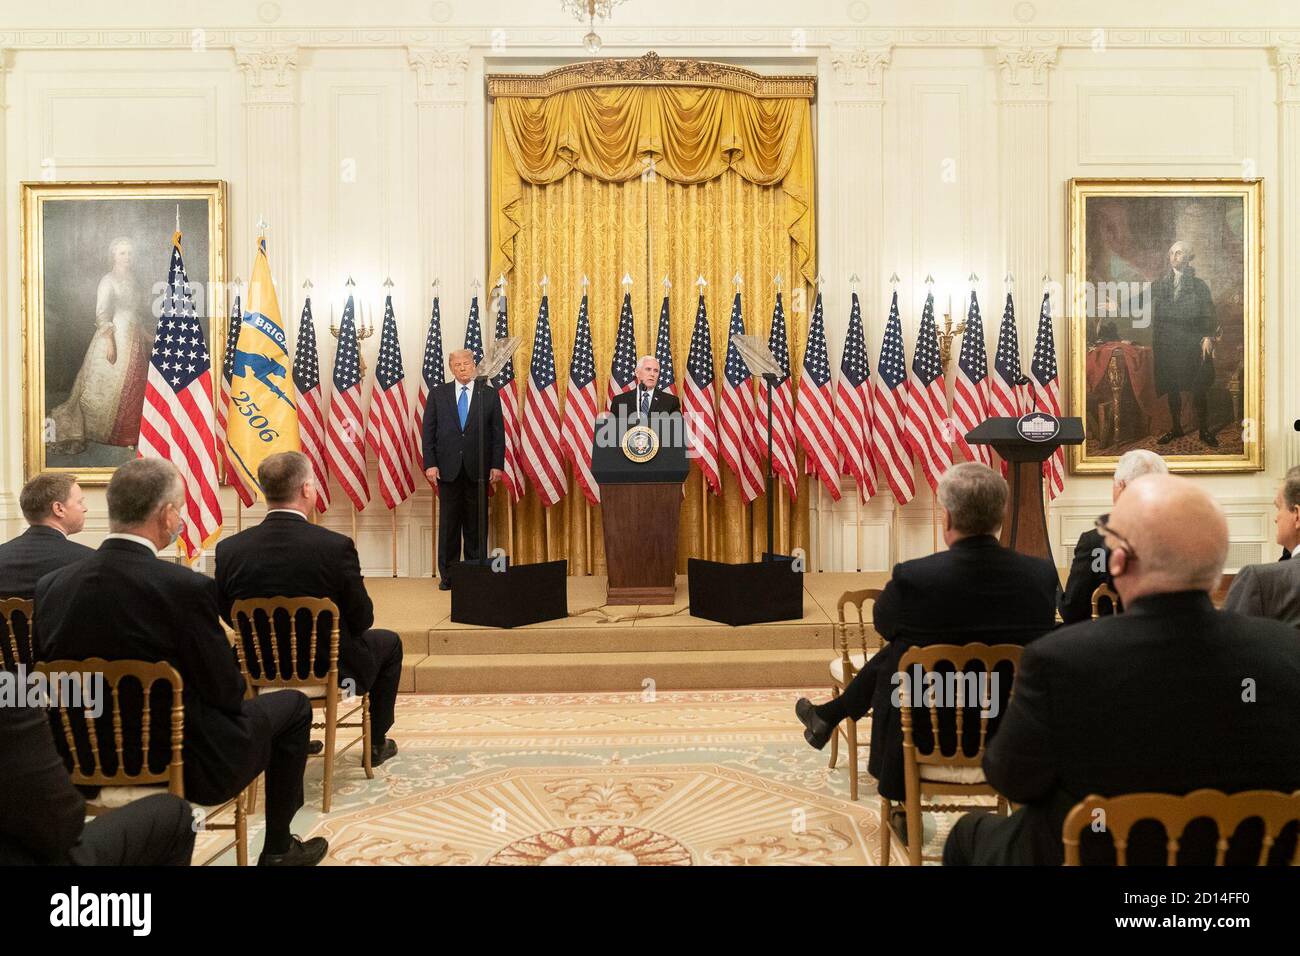 President Trump Delivers Remarks Honoring Bay of Pigs Veterans. President Donald J. Trump listens as Vice President Mike Pence delivers remarks during an event honoring Bay of Pigs veterans Wednesday, Sept. 23, 2020, in the East Room of the White House. Stock Photo